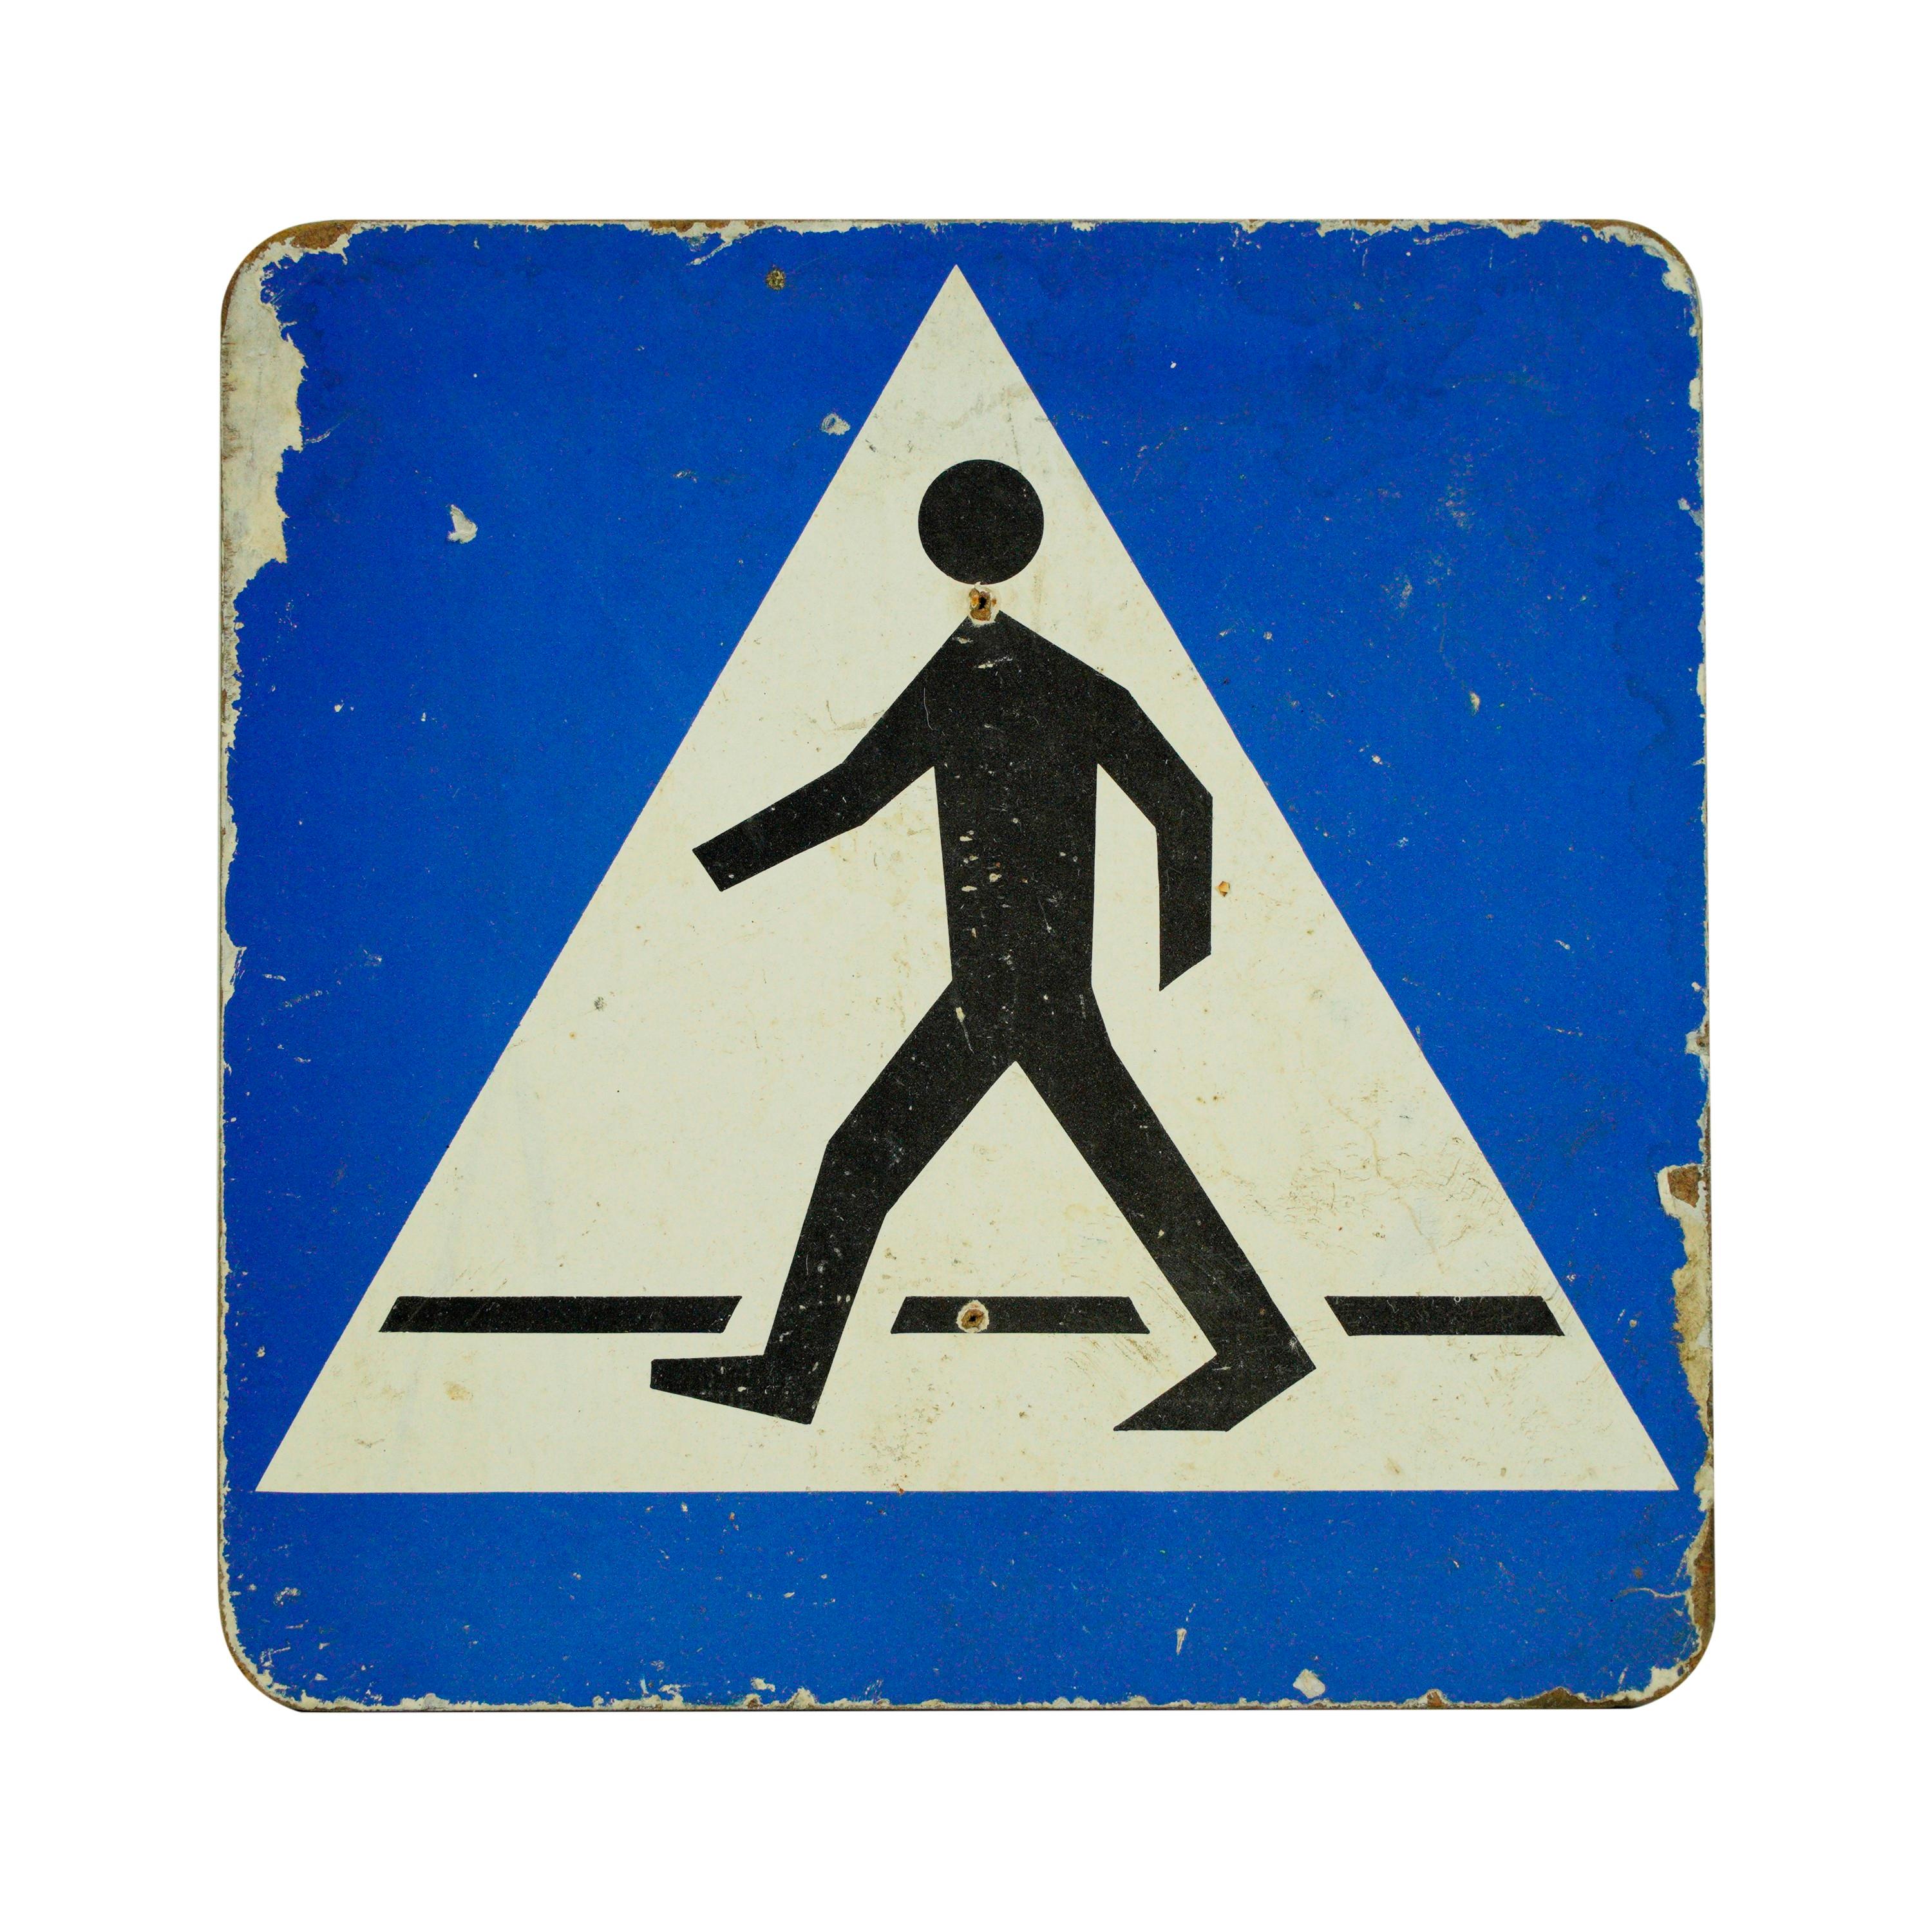 This European cardboard pedestrian sign is blue, white, and black in color. Good condition with appropriate wear from age. One available. Please note, this item is located in our Scranton, PA location.